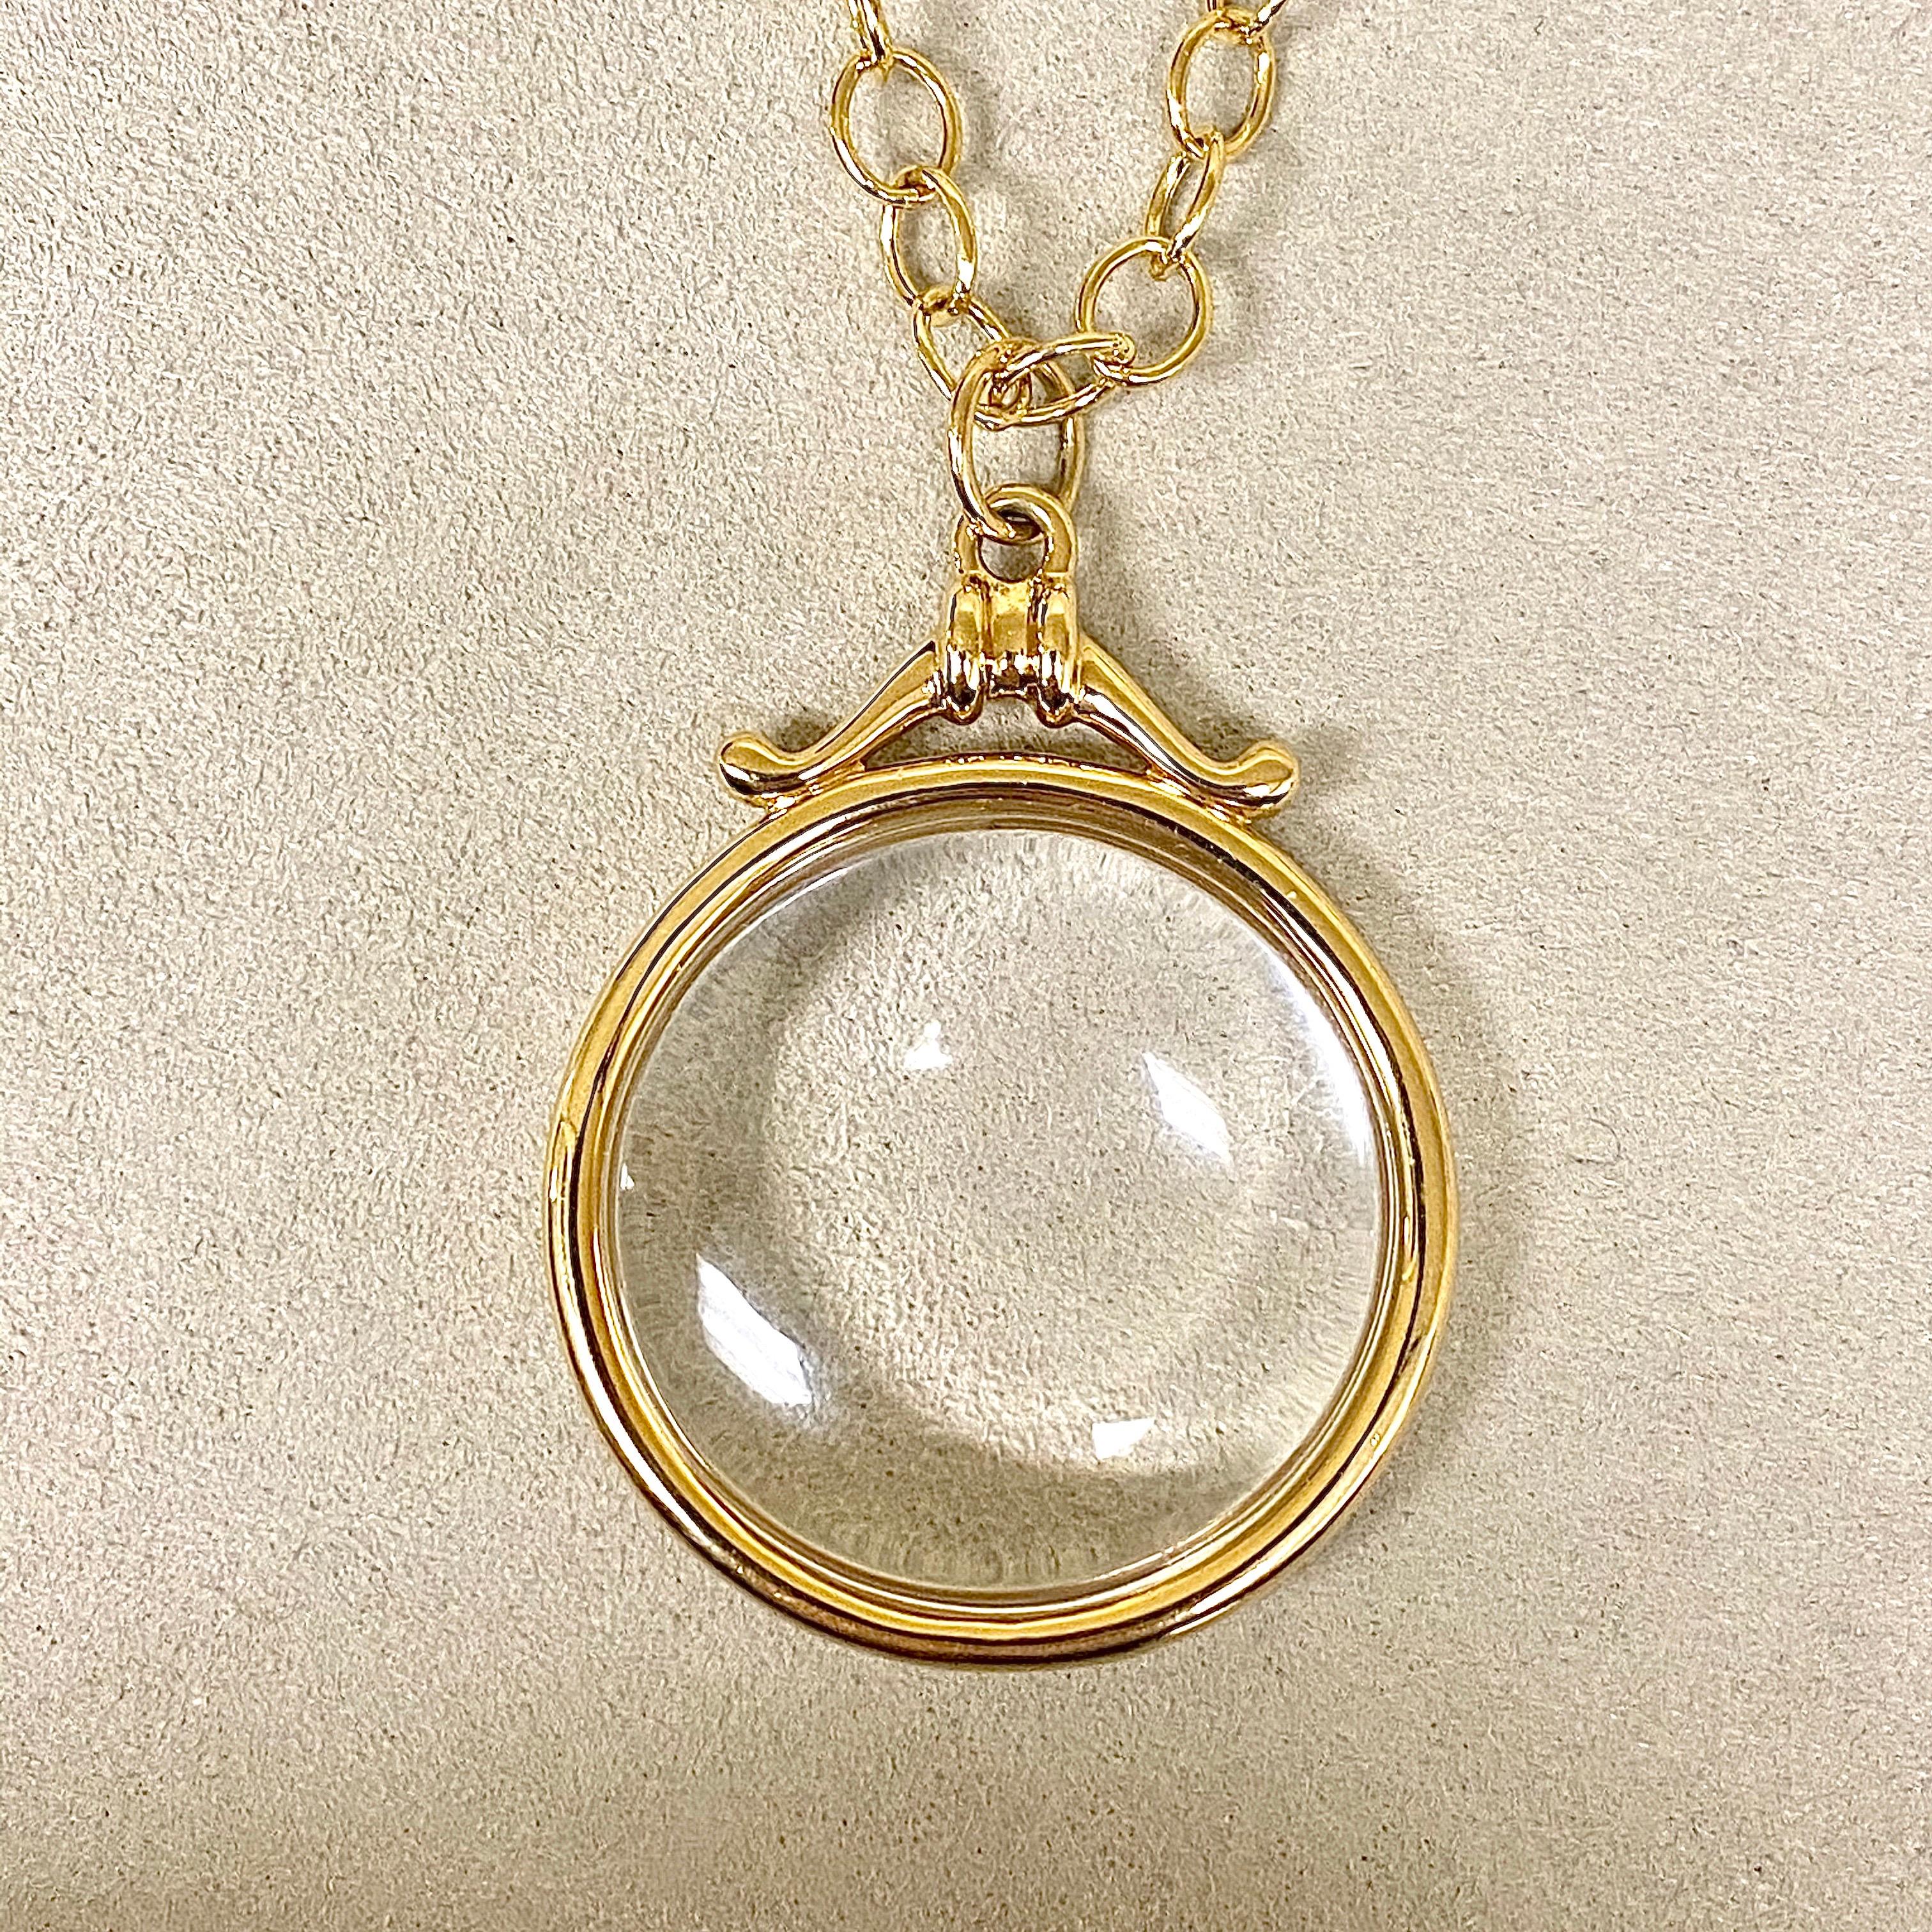 Created in 18 karat yellow gold
Rock Crystal 35 cts approx
Chain sold separately
Limited Edition

Crafted from 18 karat yellow gold, this limited edition pendant features a mesmerizing Rock Crystal of approximately 35 cts. Please note that the chain